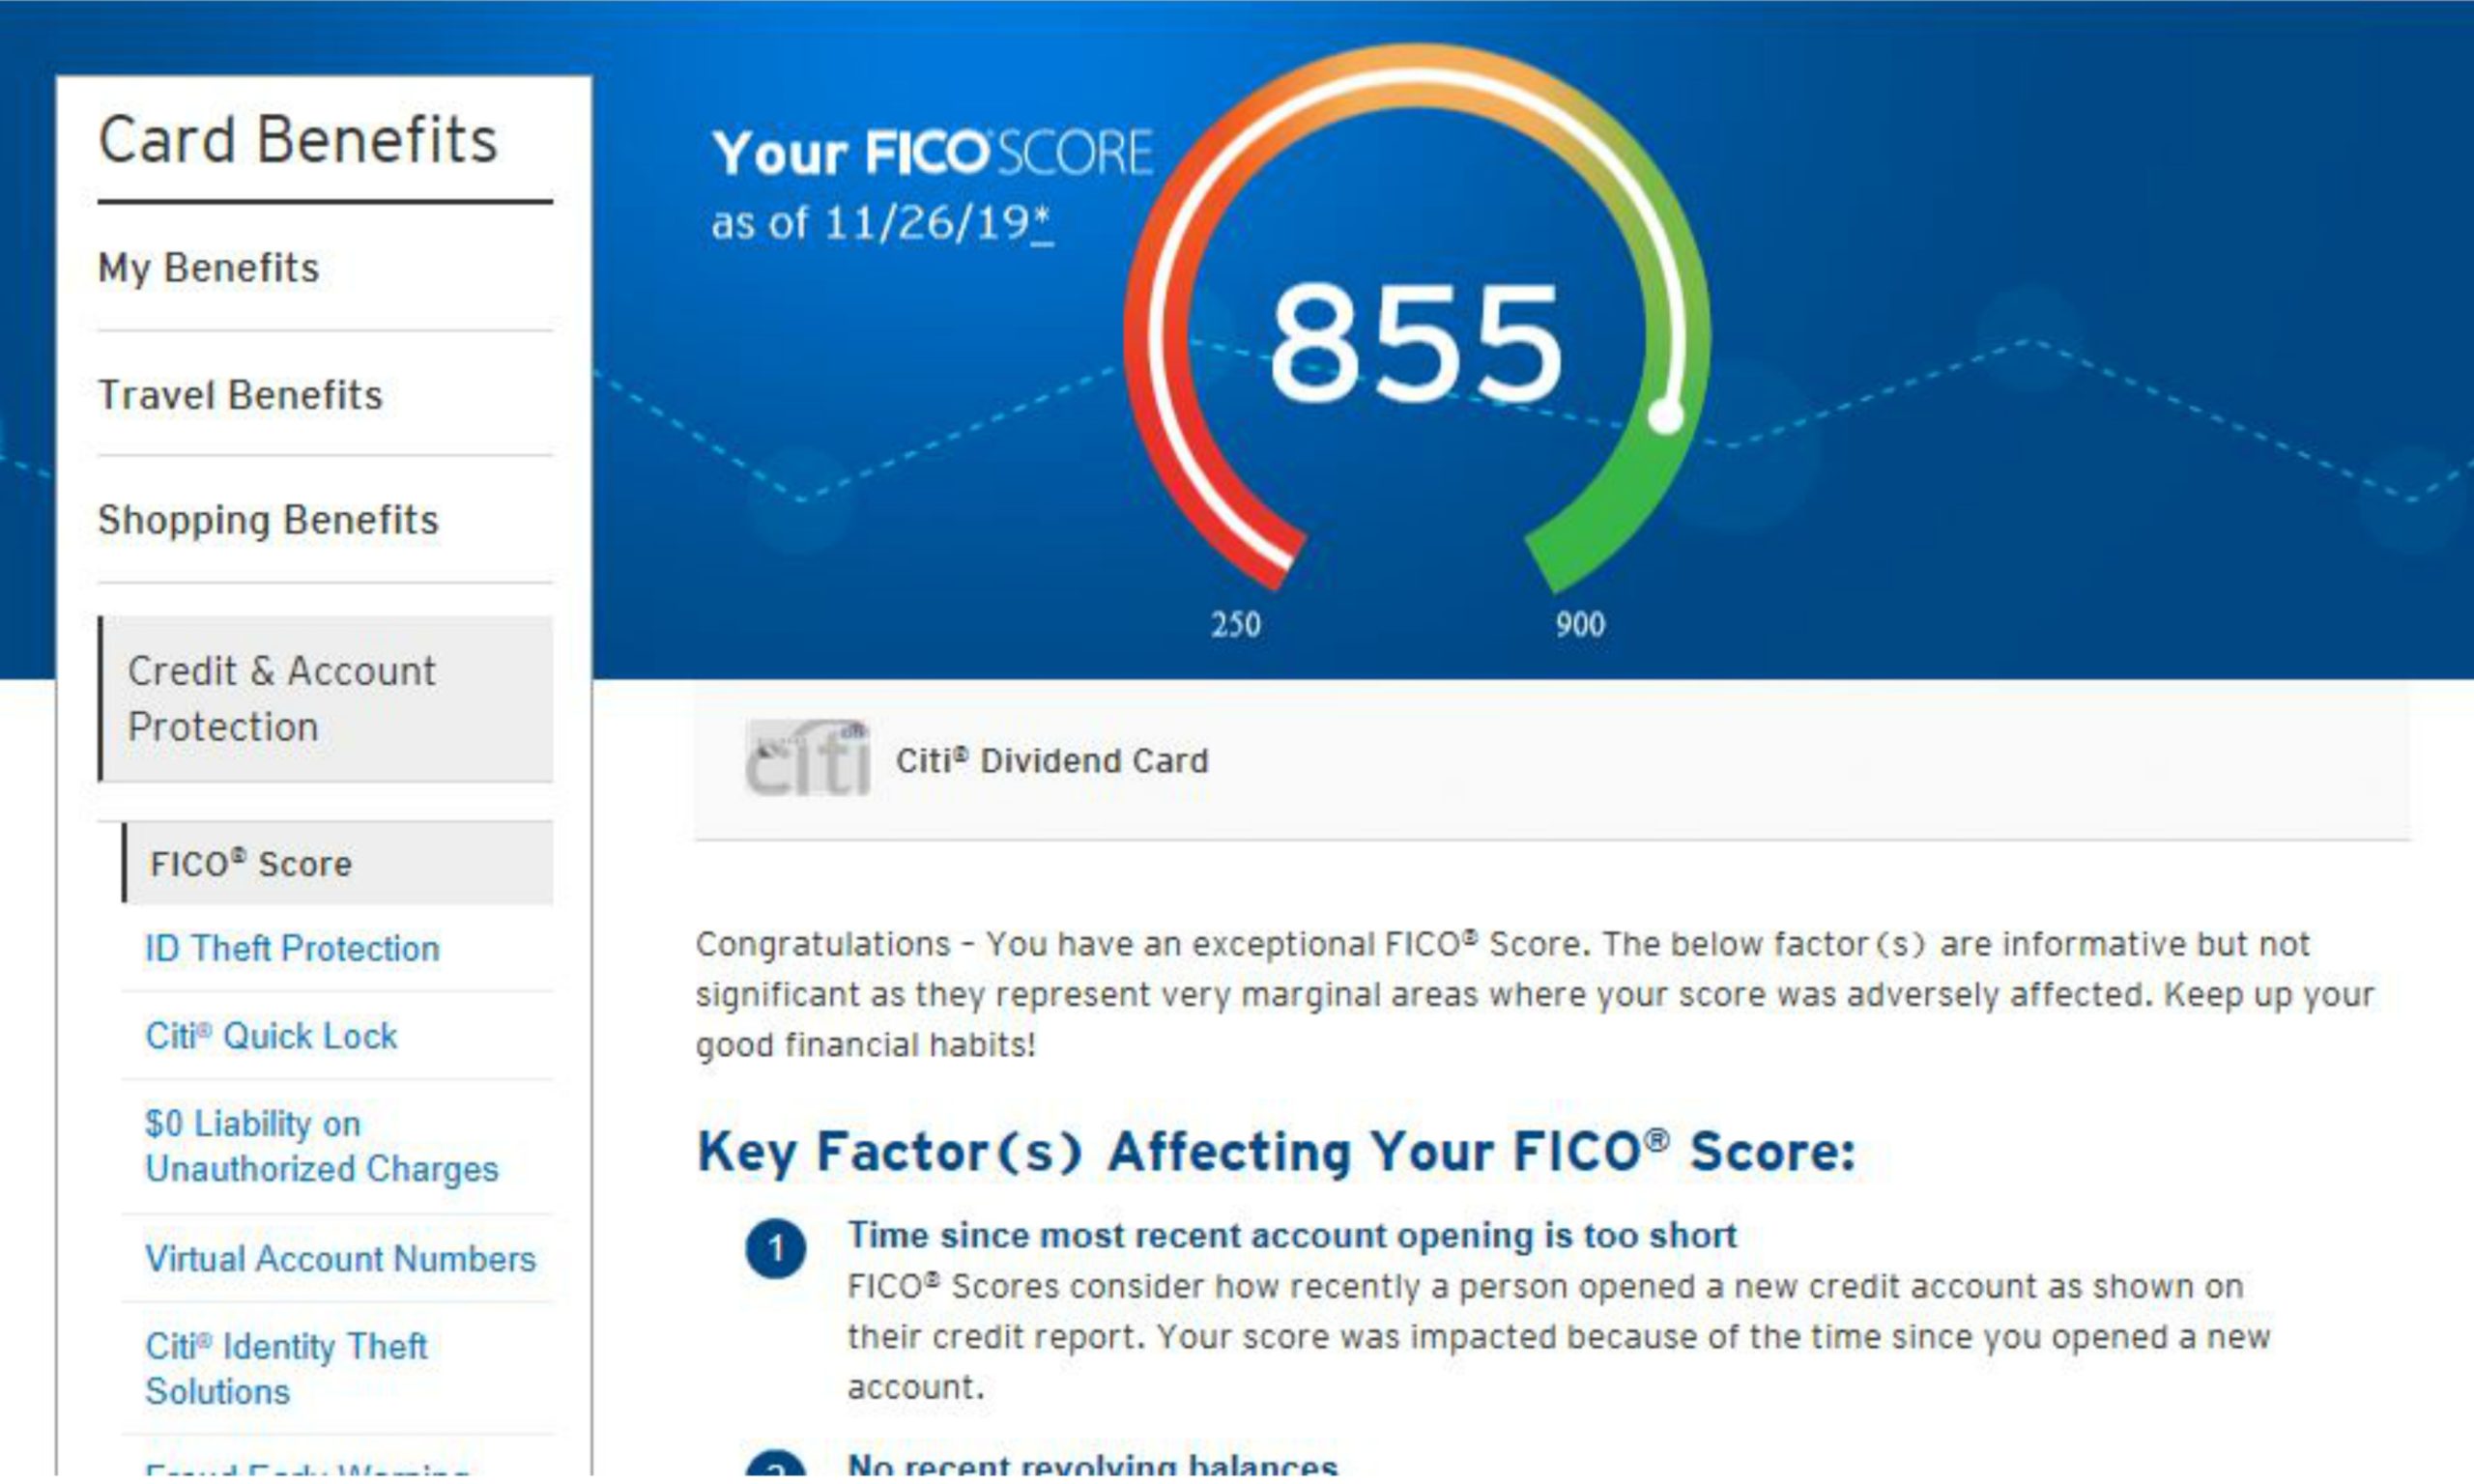 increase your credit score to more than 800